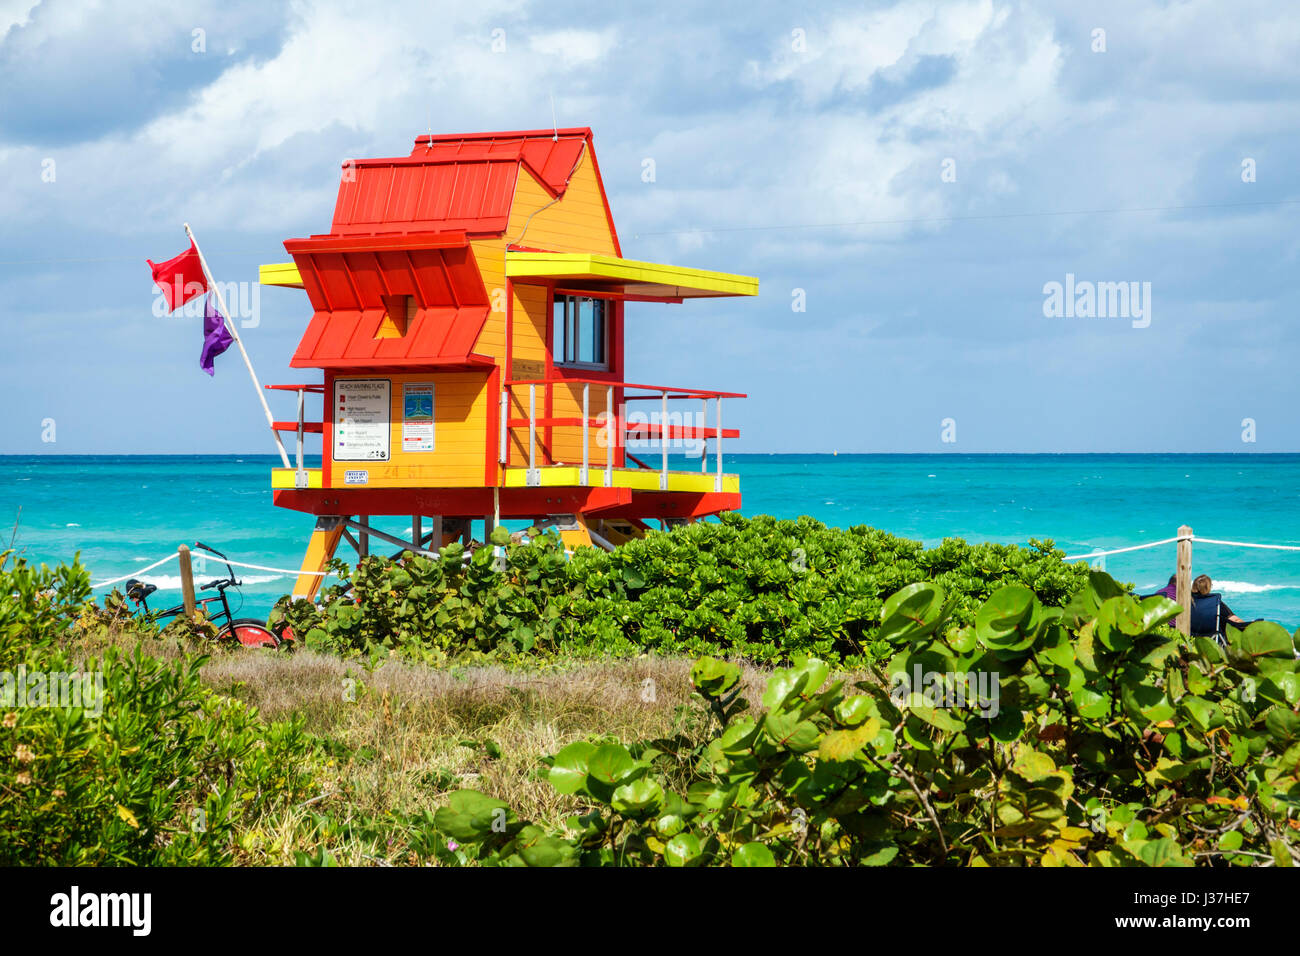 Miami Beach Florida,Atlantic Ocean,water,beach,dune,lifeguard tower station,ocean rescue,warning flags,red,purple,windy,high surf currents,FL170326031 Stock Photo